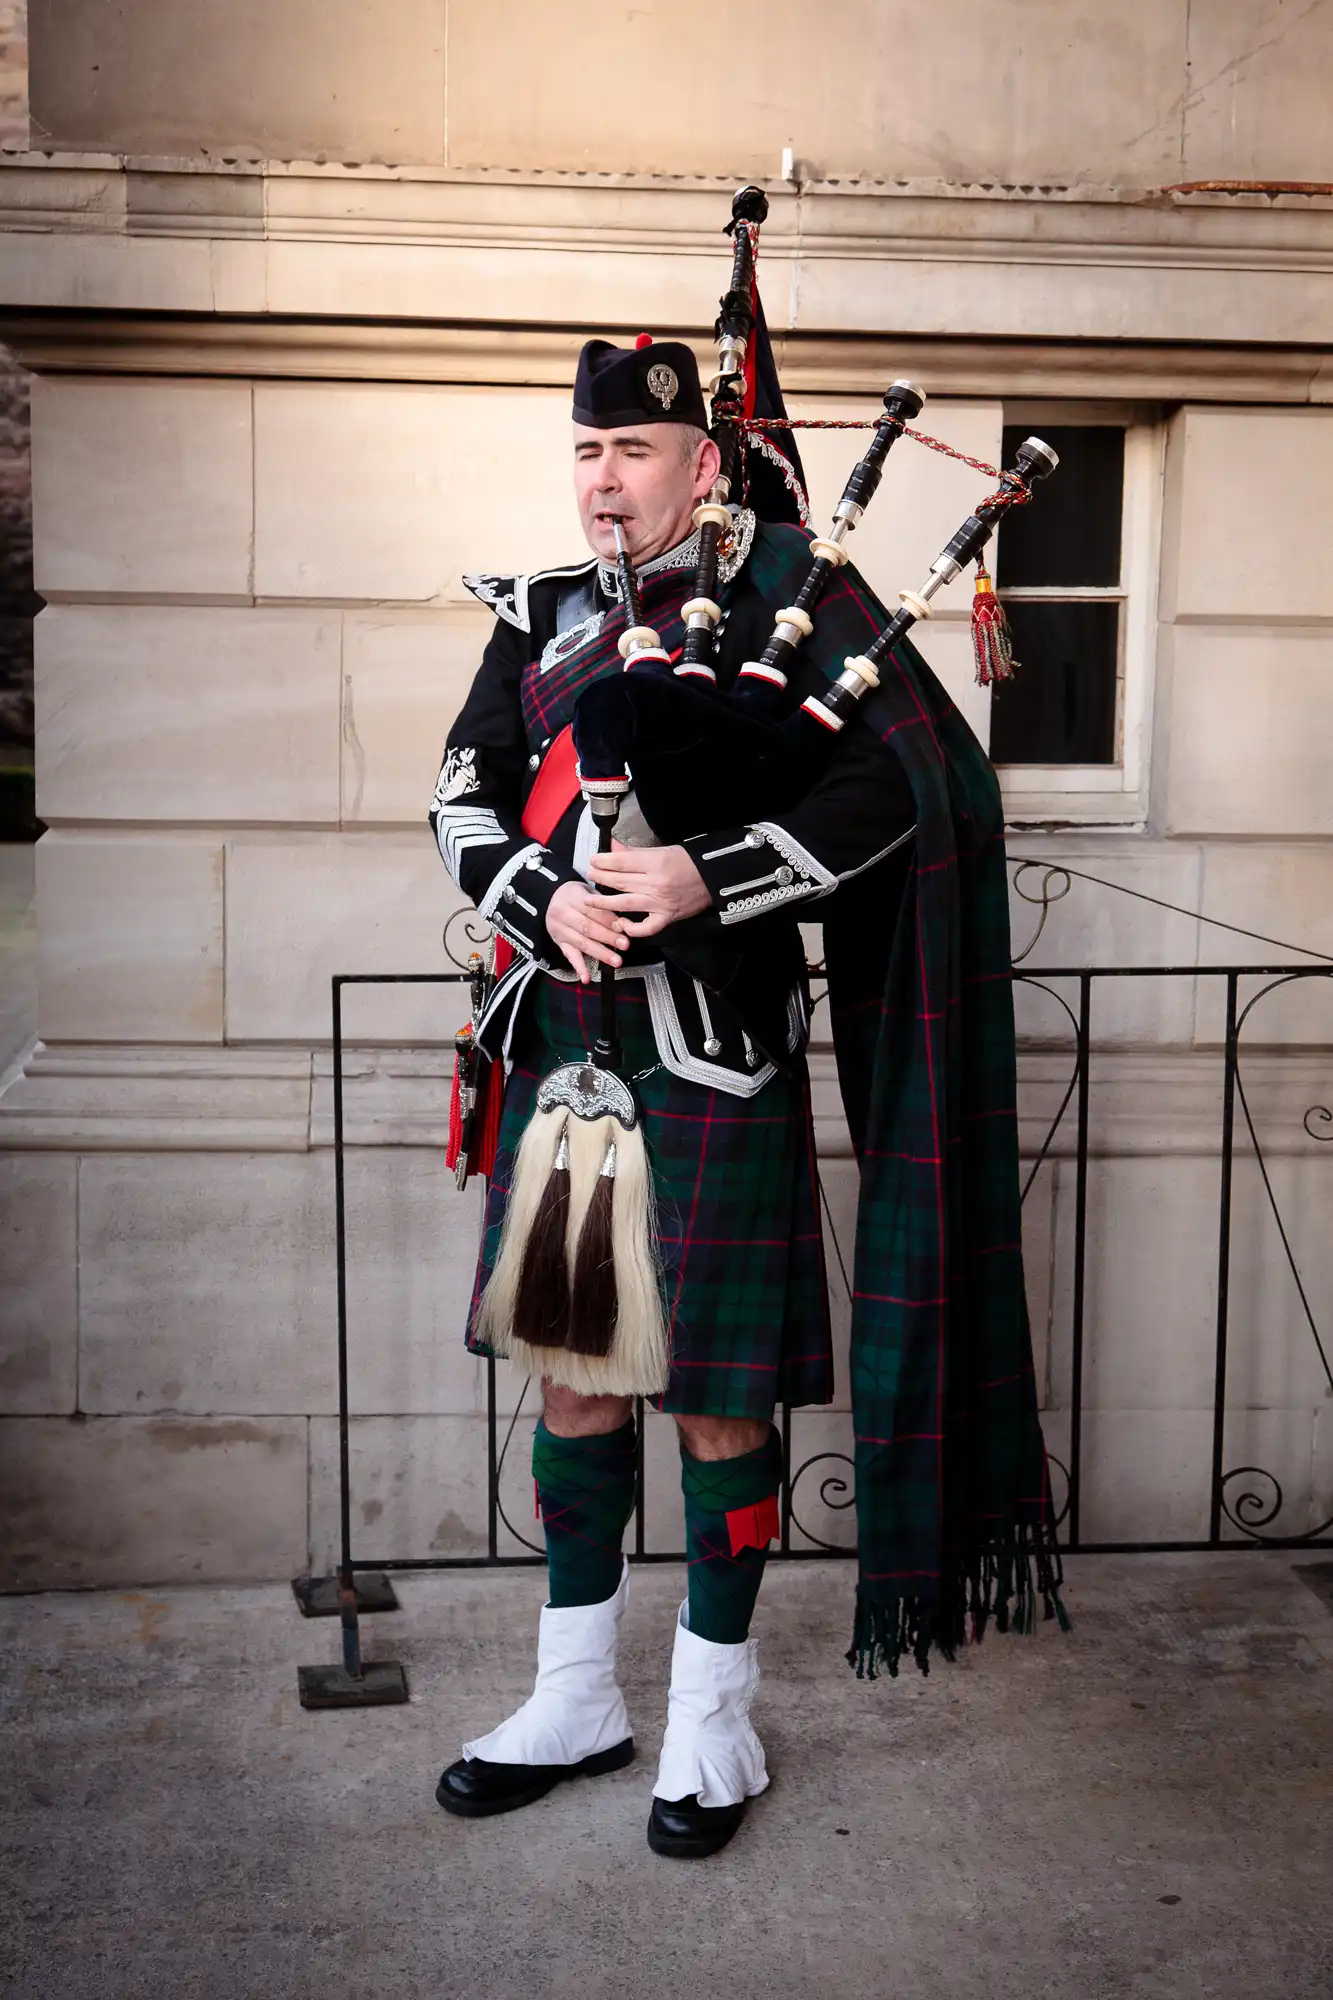 A man in traditional scottish highland dress playing the bagpipes, featuring a tartan kilt and a sporran.